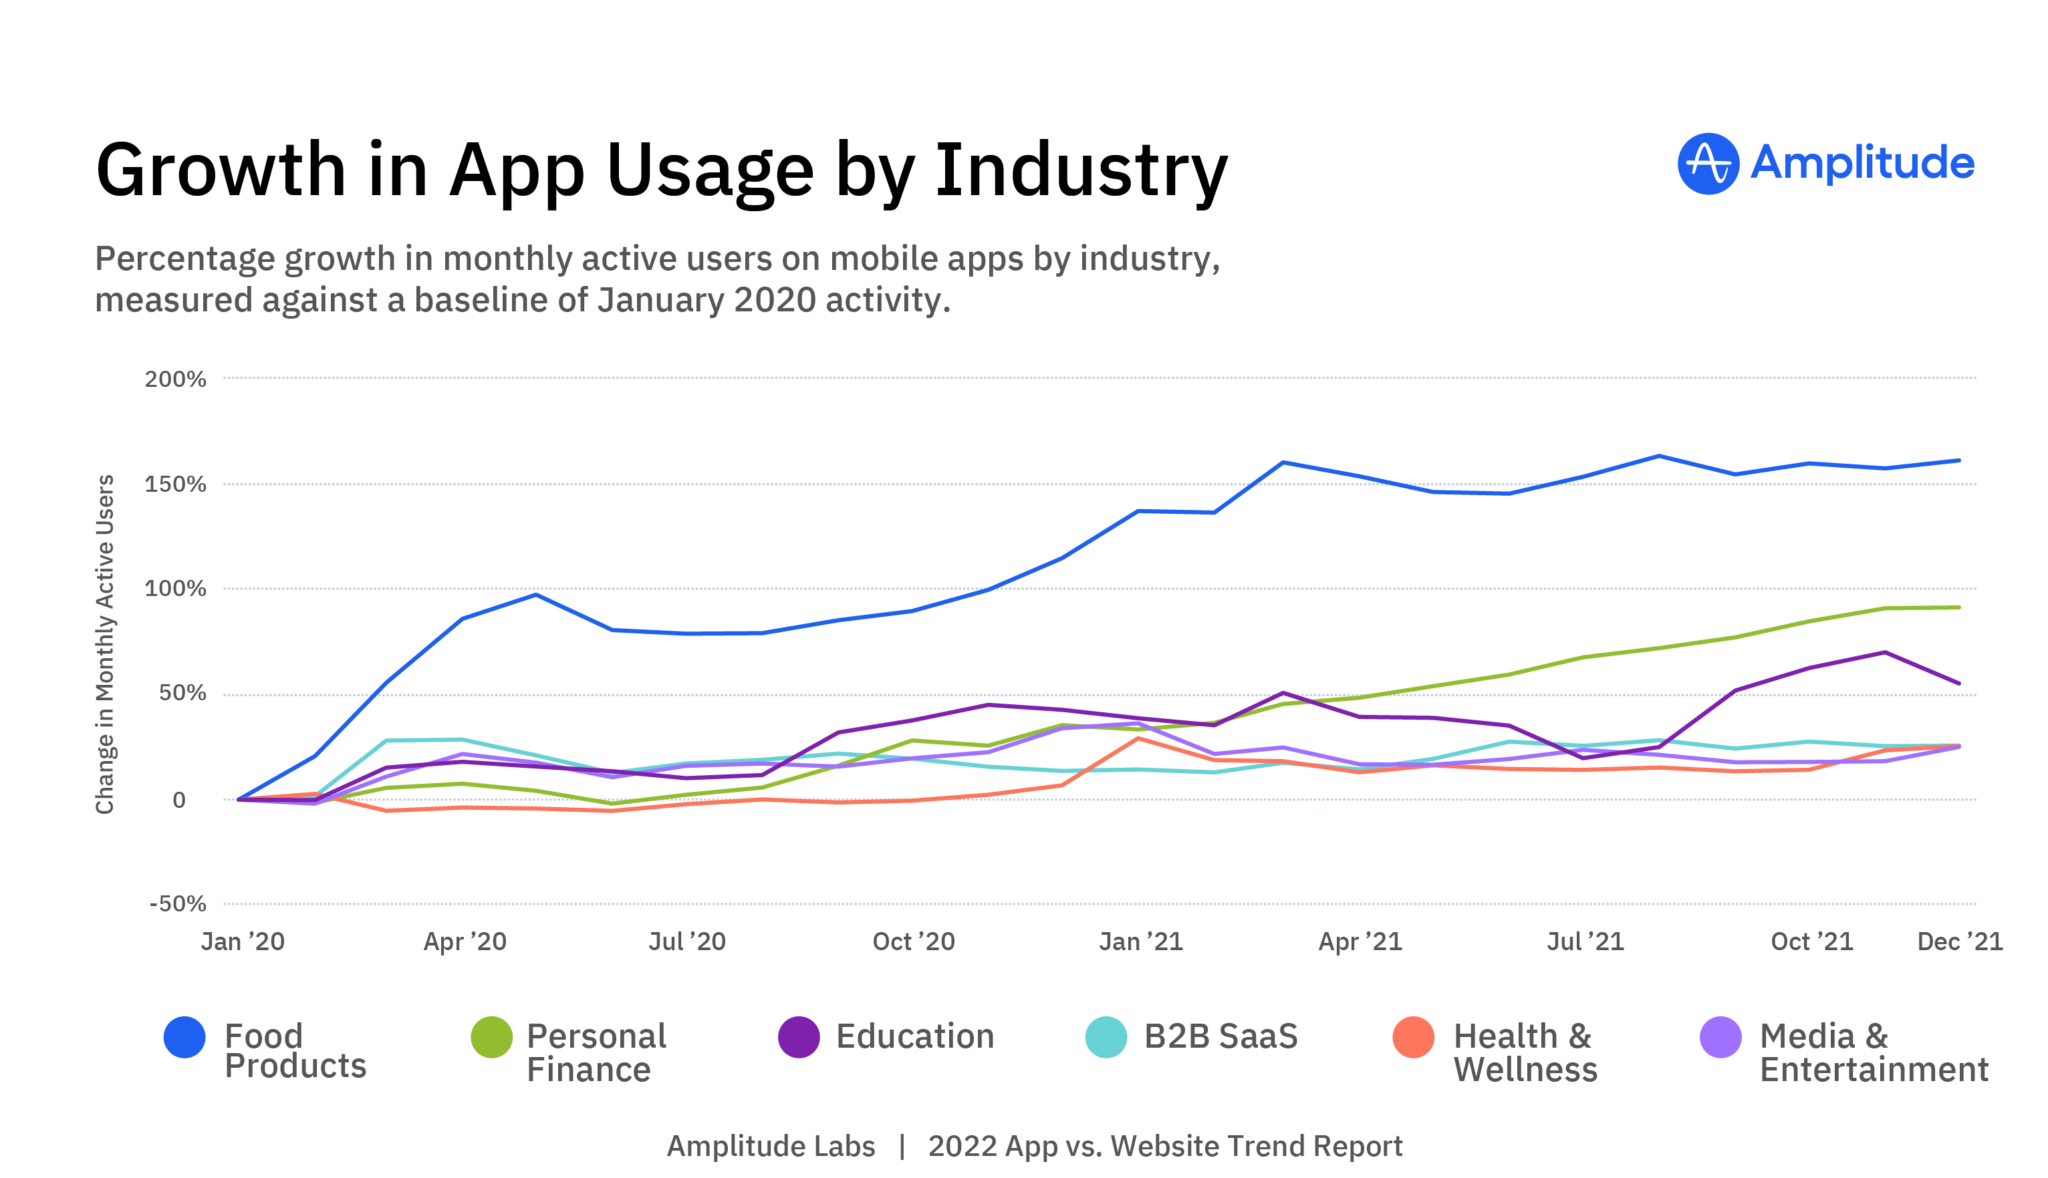 Growth in app usage by industry